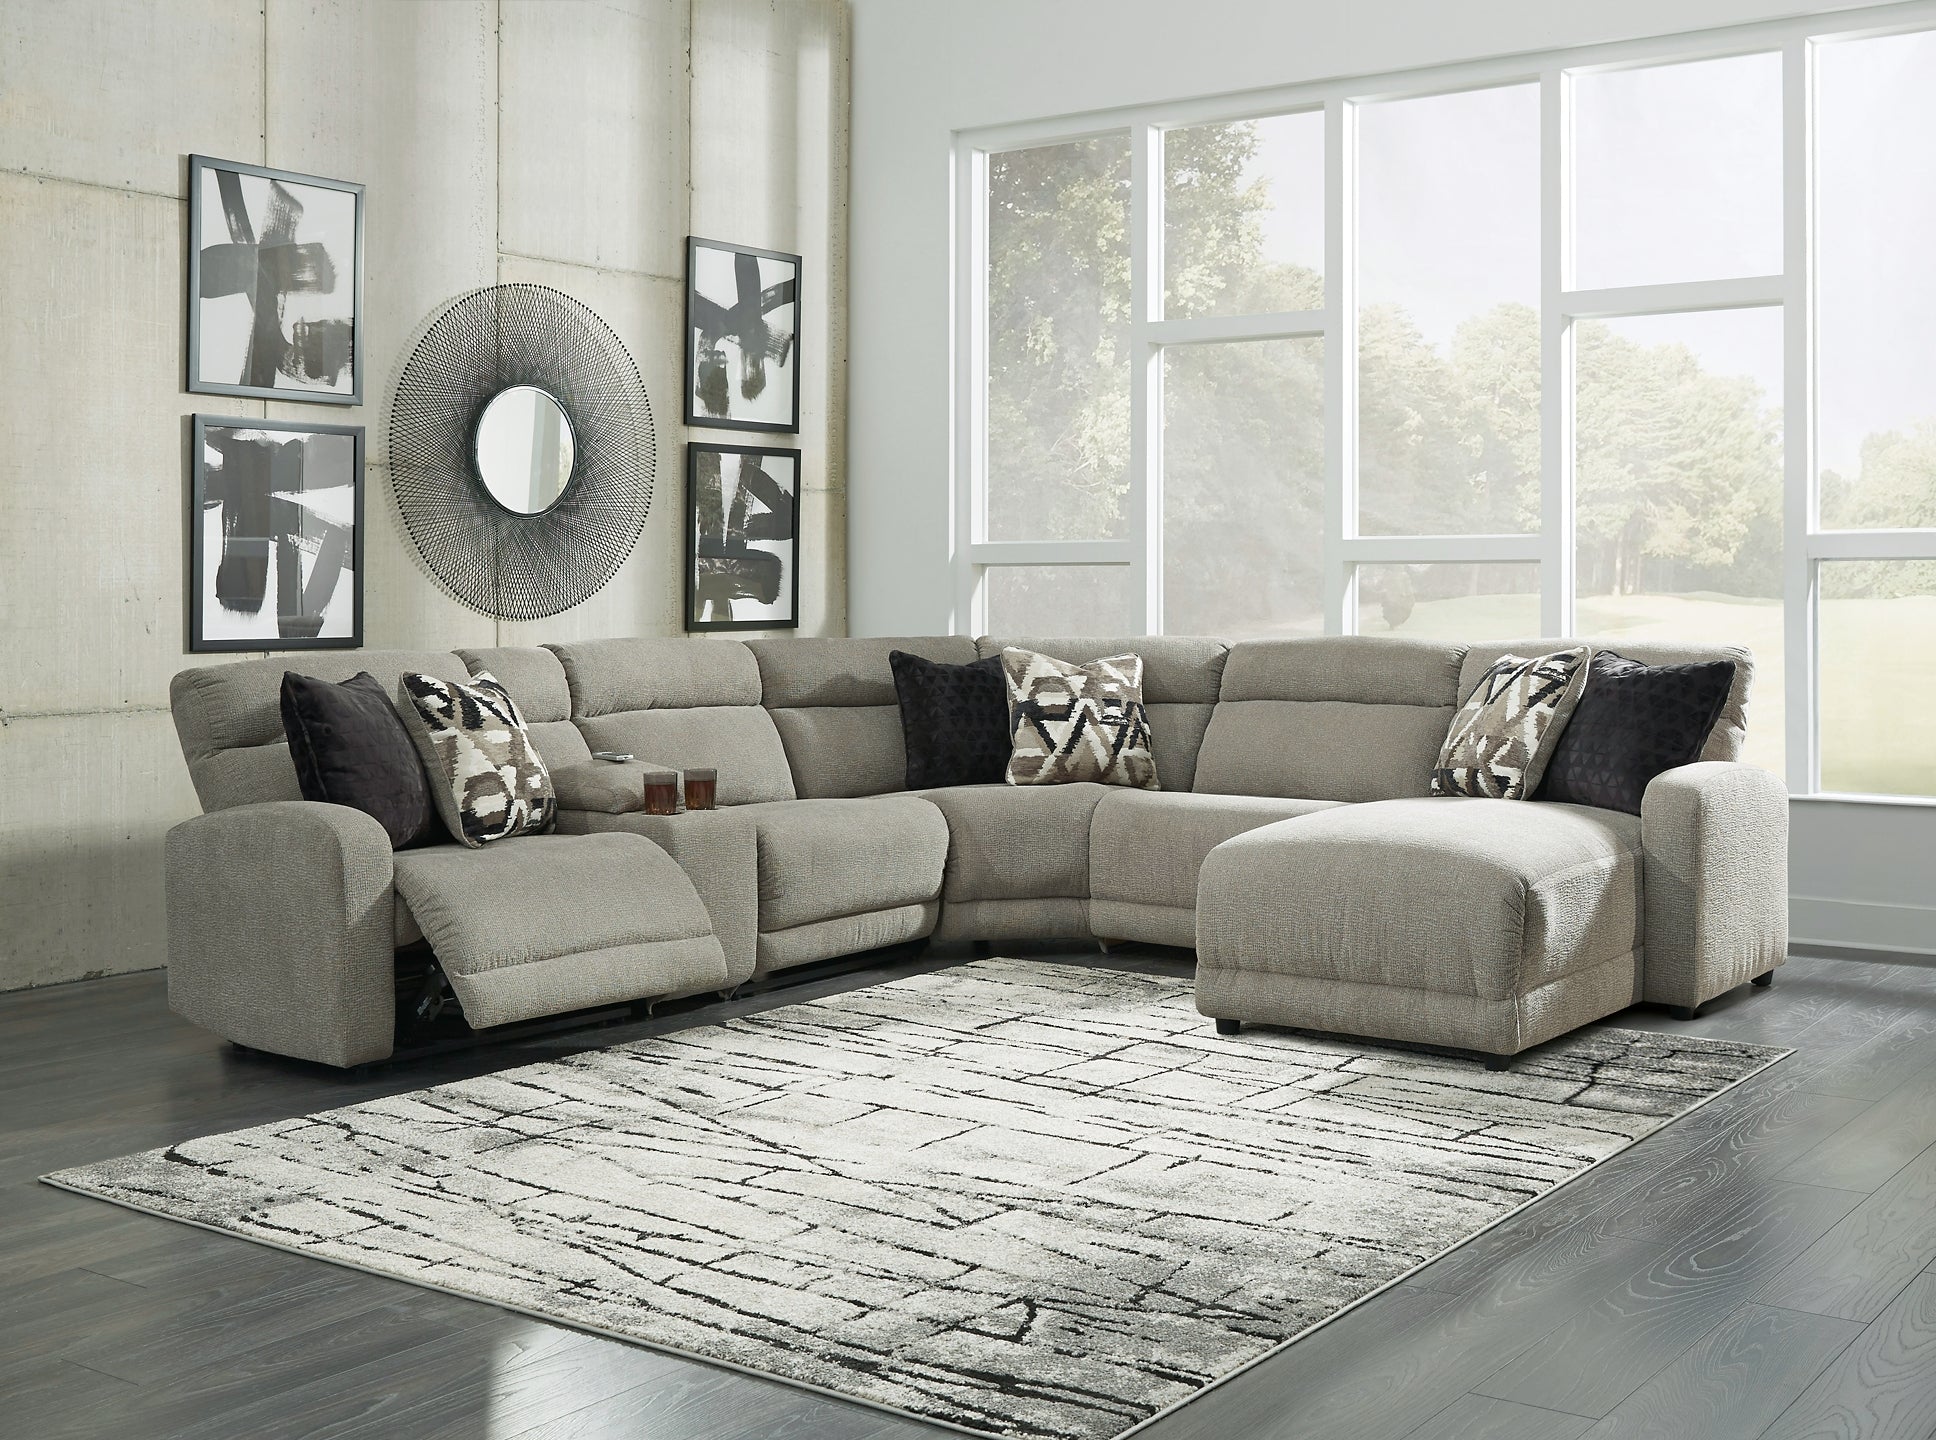 Colleyville 6 Piece Power Reclining Sectional With Chaise Furniture Factory Outlet